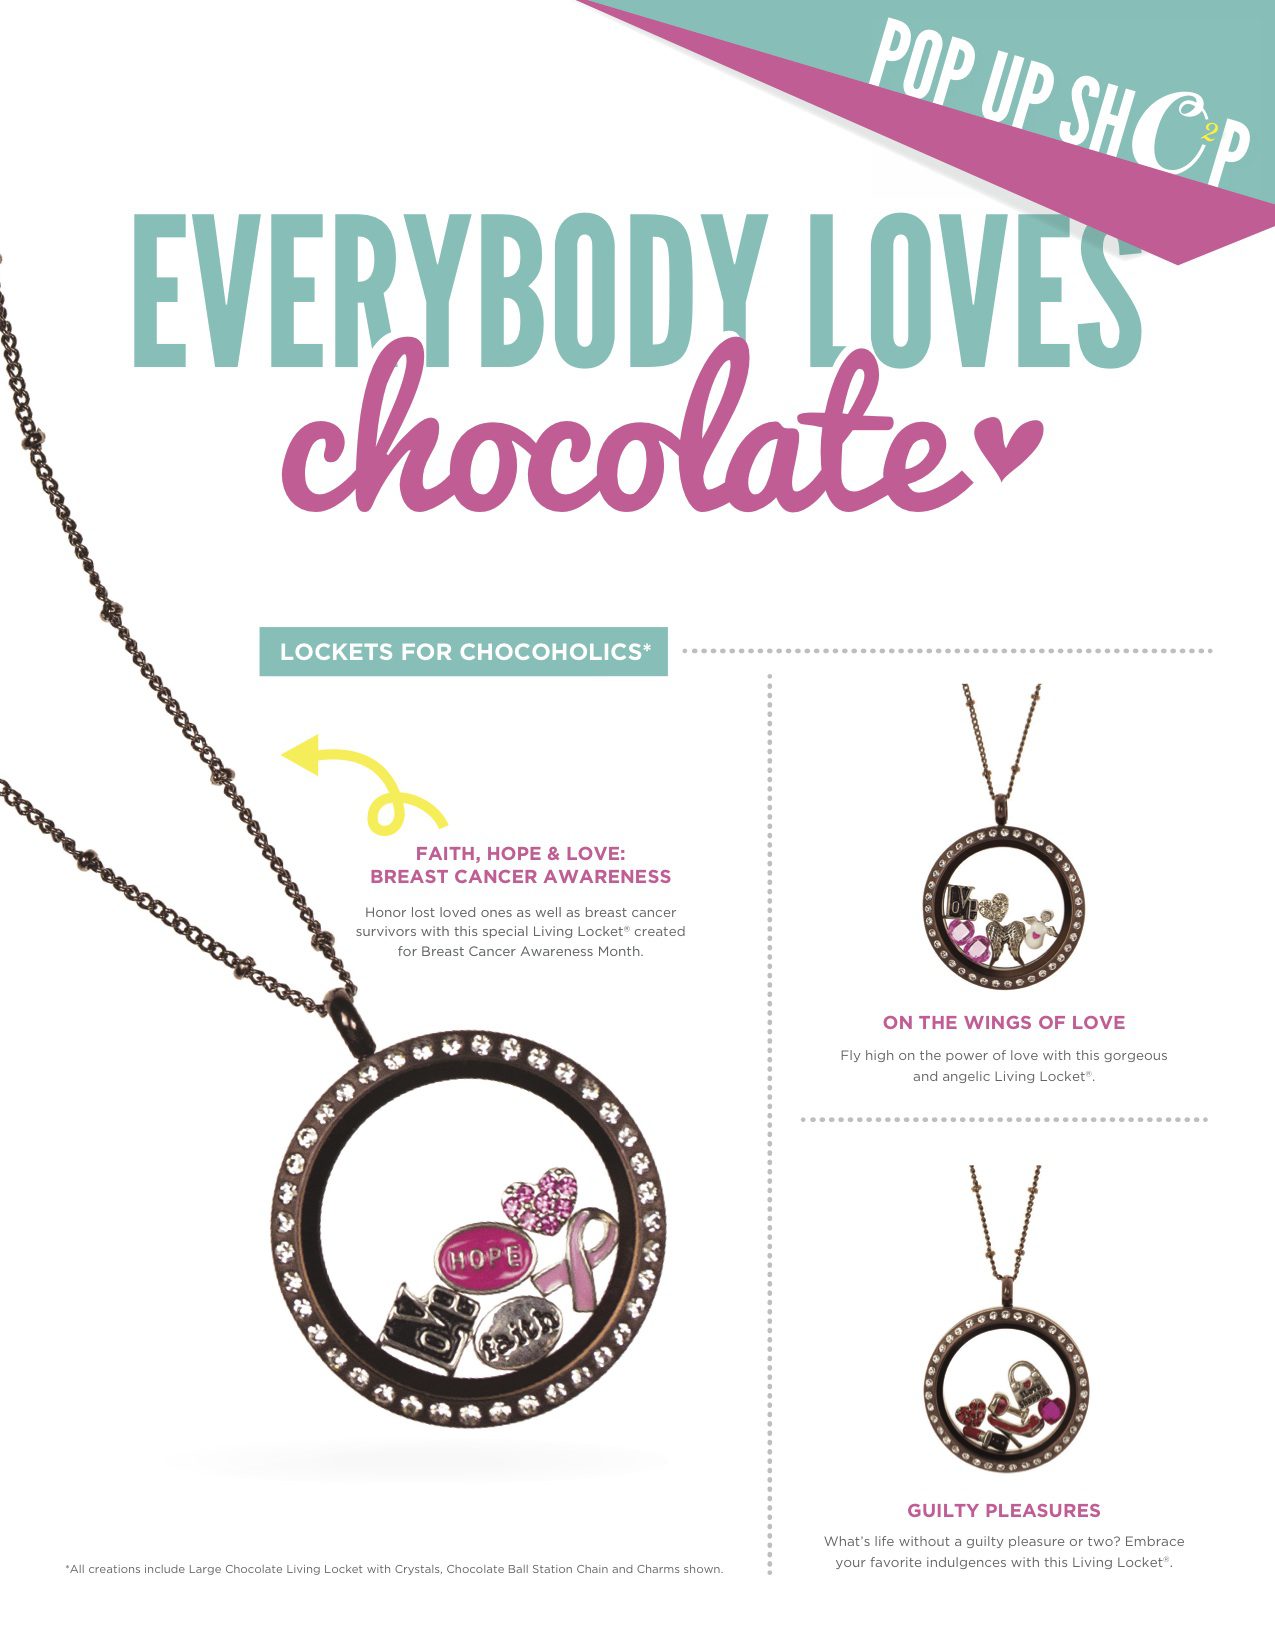 Everybody Loves Chocolate First Origami Owl 48 Hour Pop Up